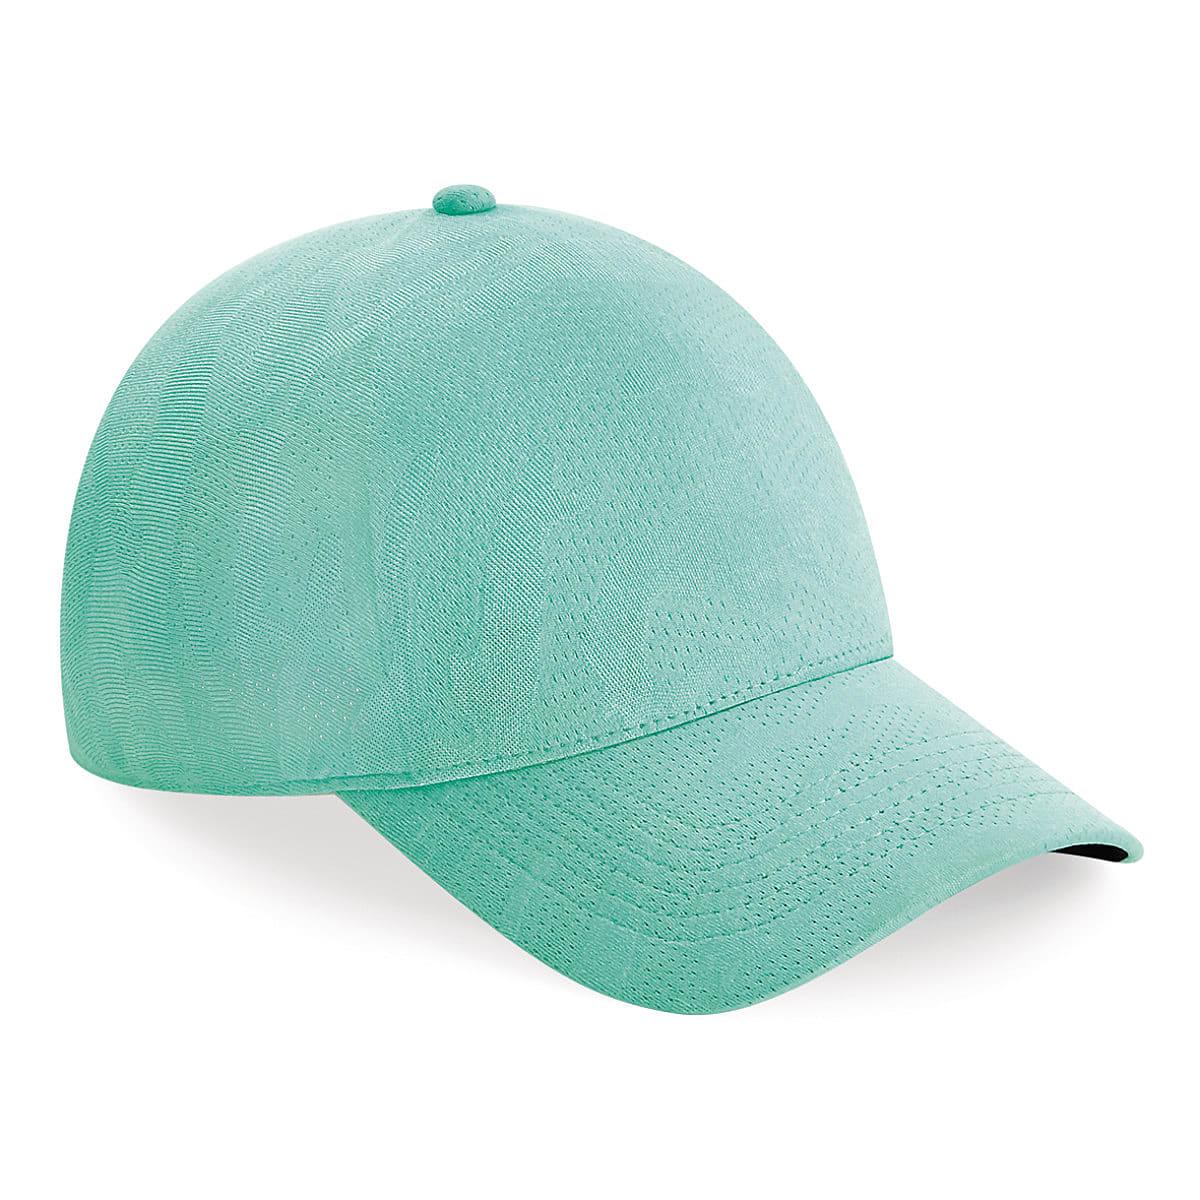 Beechfield Seamless Performance Cap in Heather Mint (Product Code: B558)